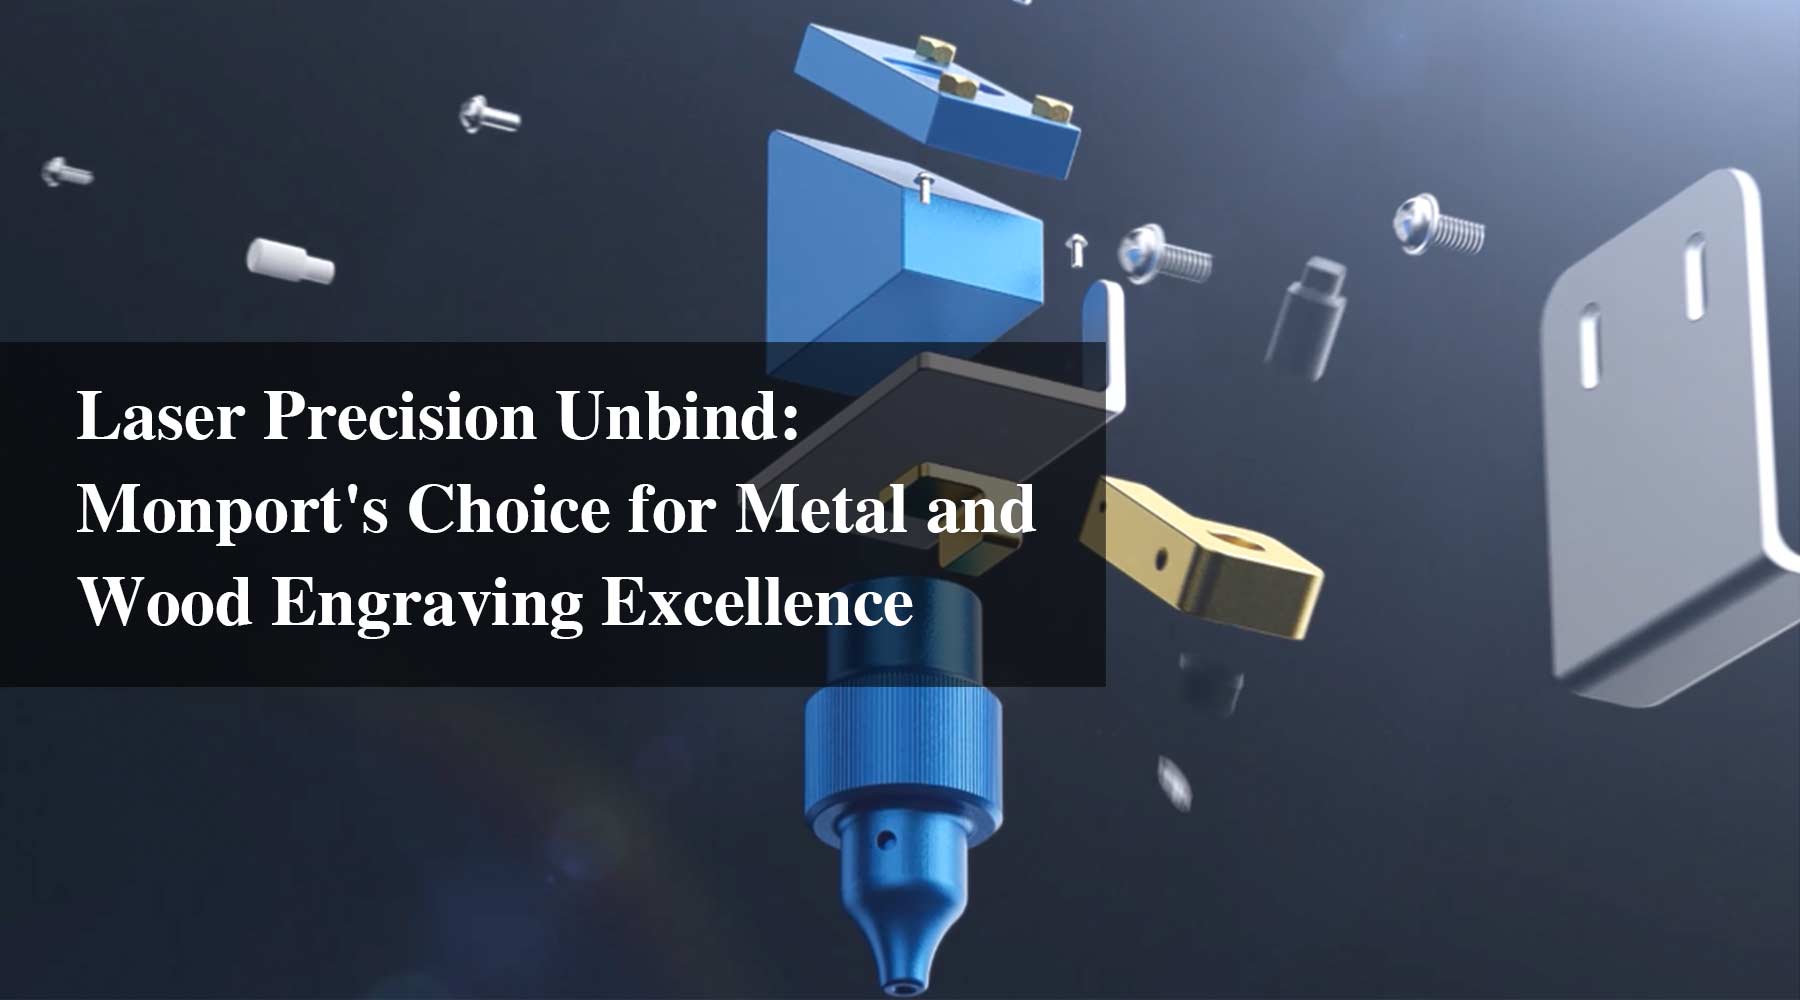 Laser Precision Unbind: Monport's Choice for Metal and Wood Engraving Excellence